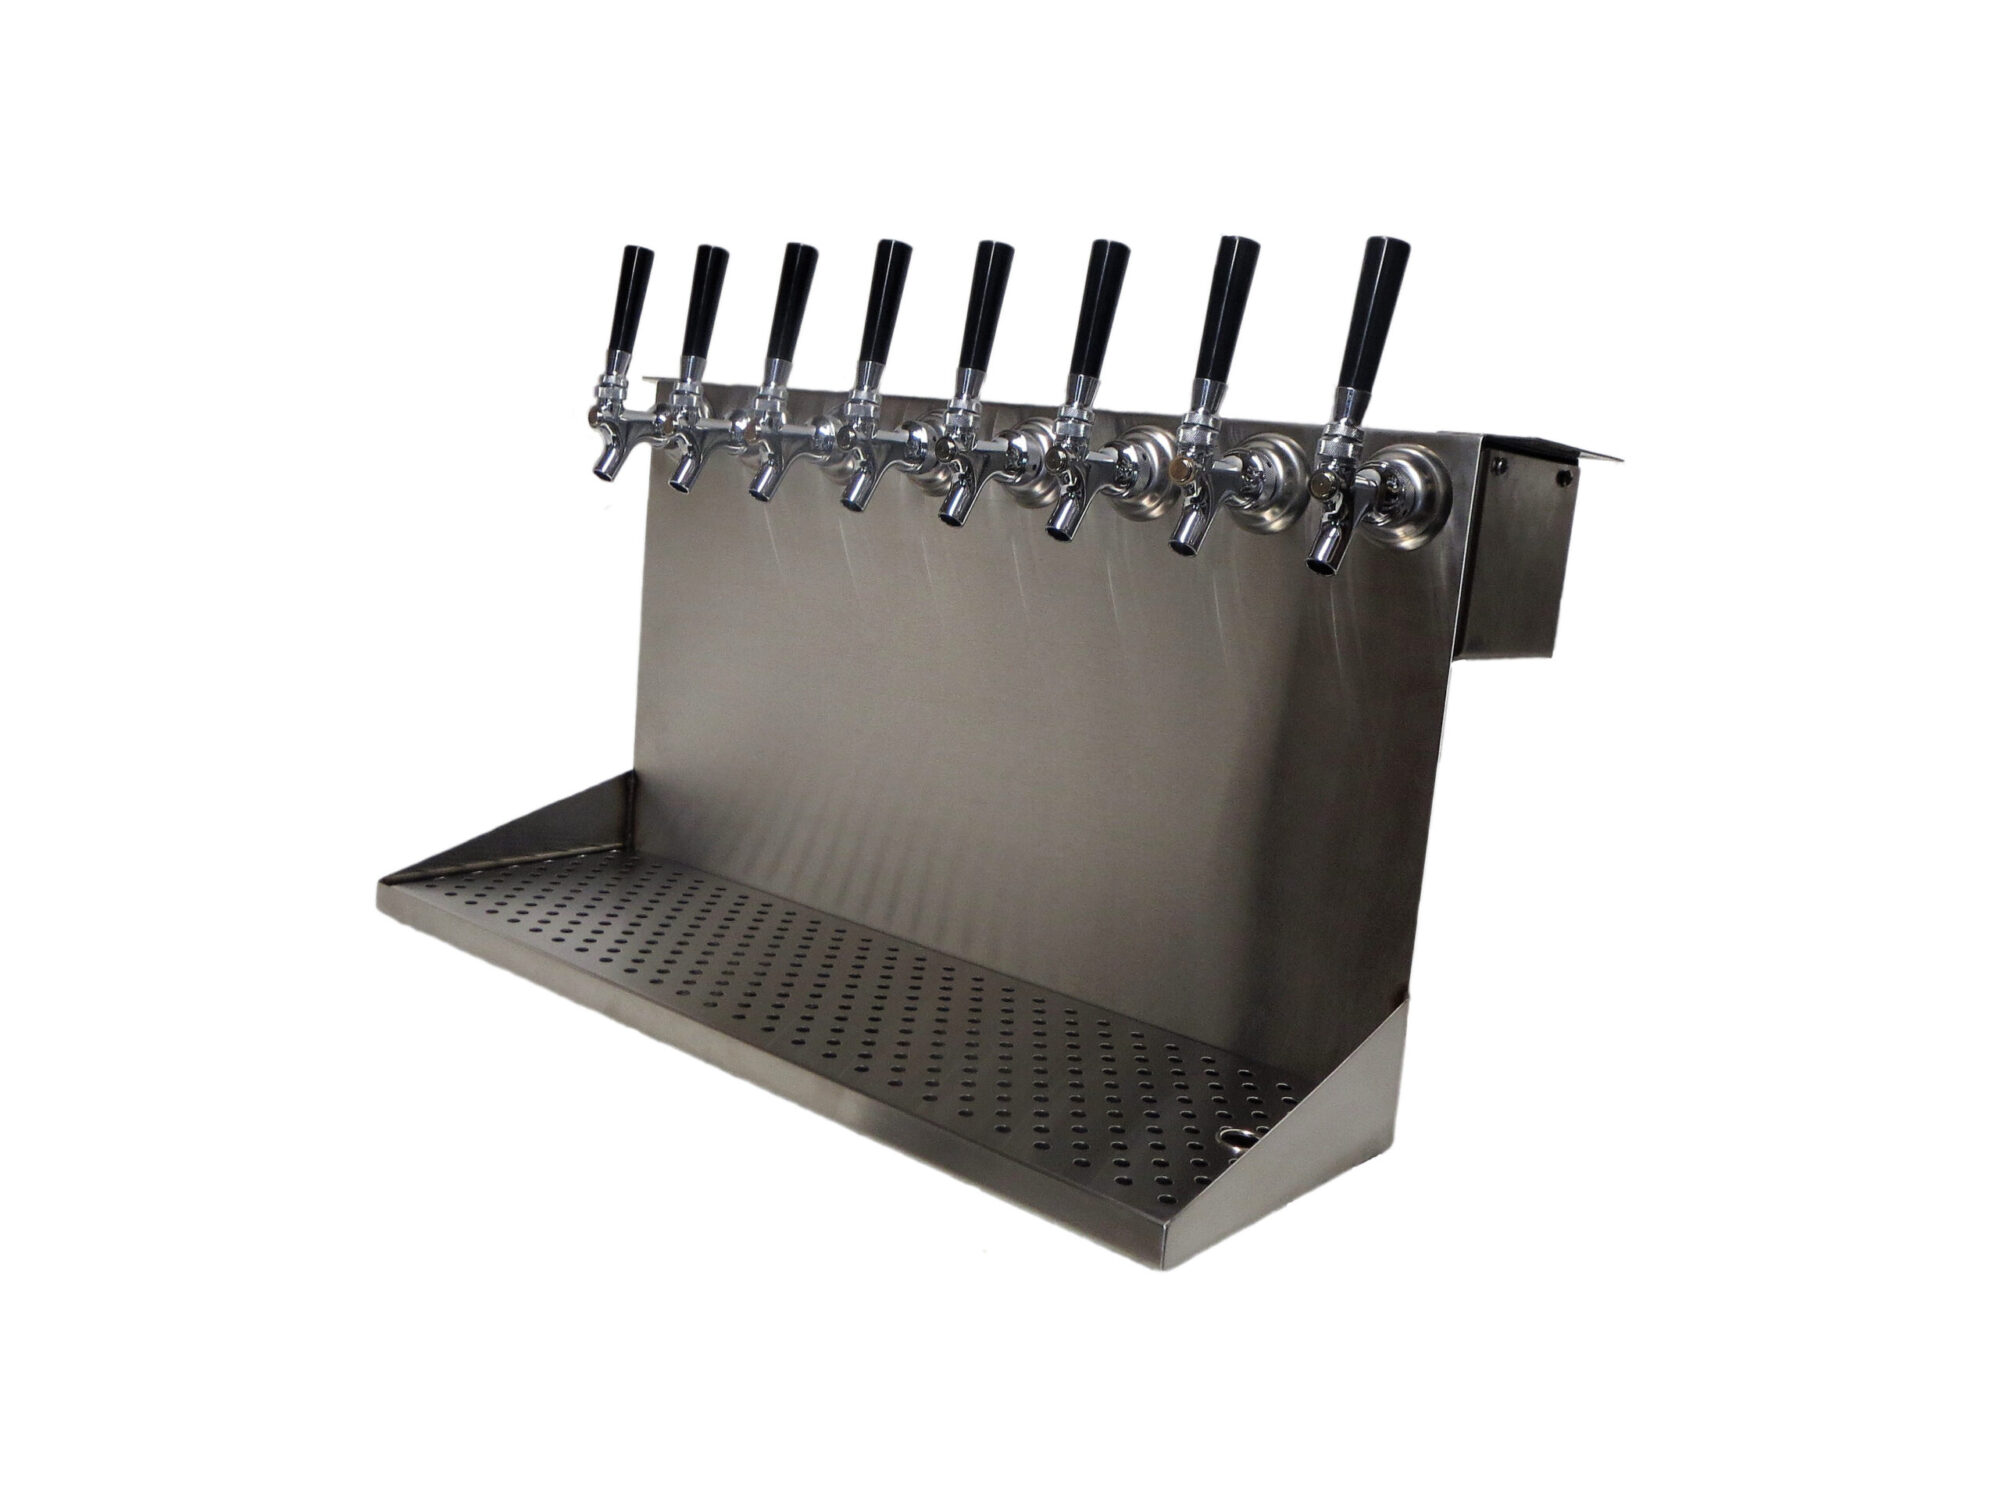 688-8G Eight Faucet Under Bar Dispensing Tower - 24" L x 14" H x 8" W Drip Tray - Access For Lines Out the Back or Bottom